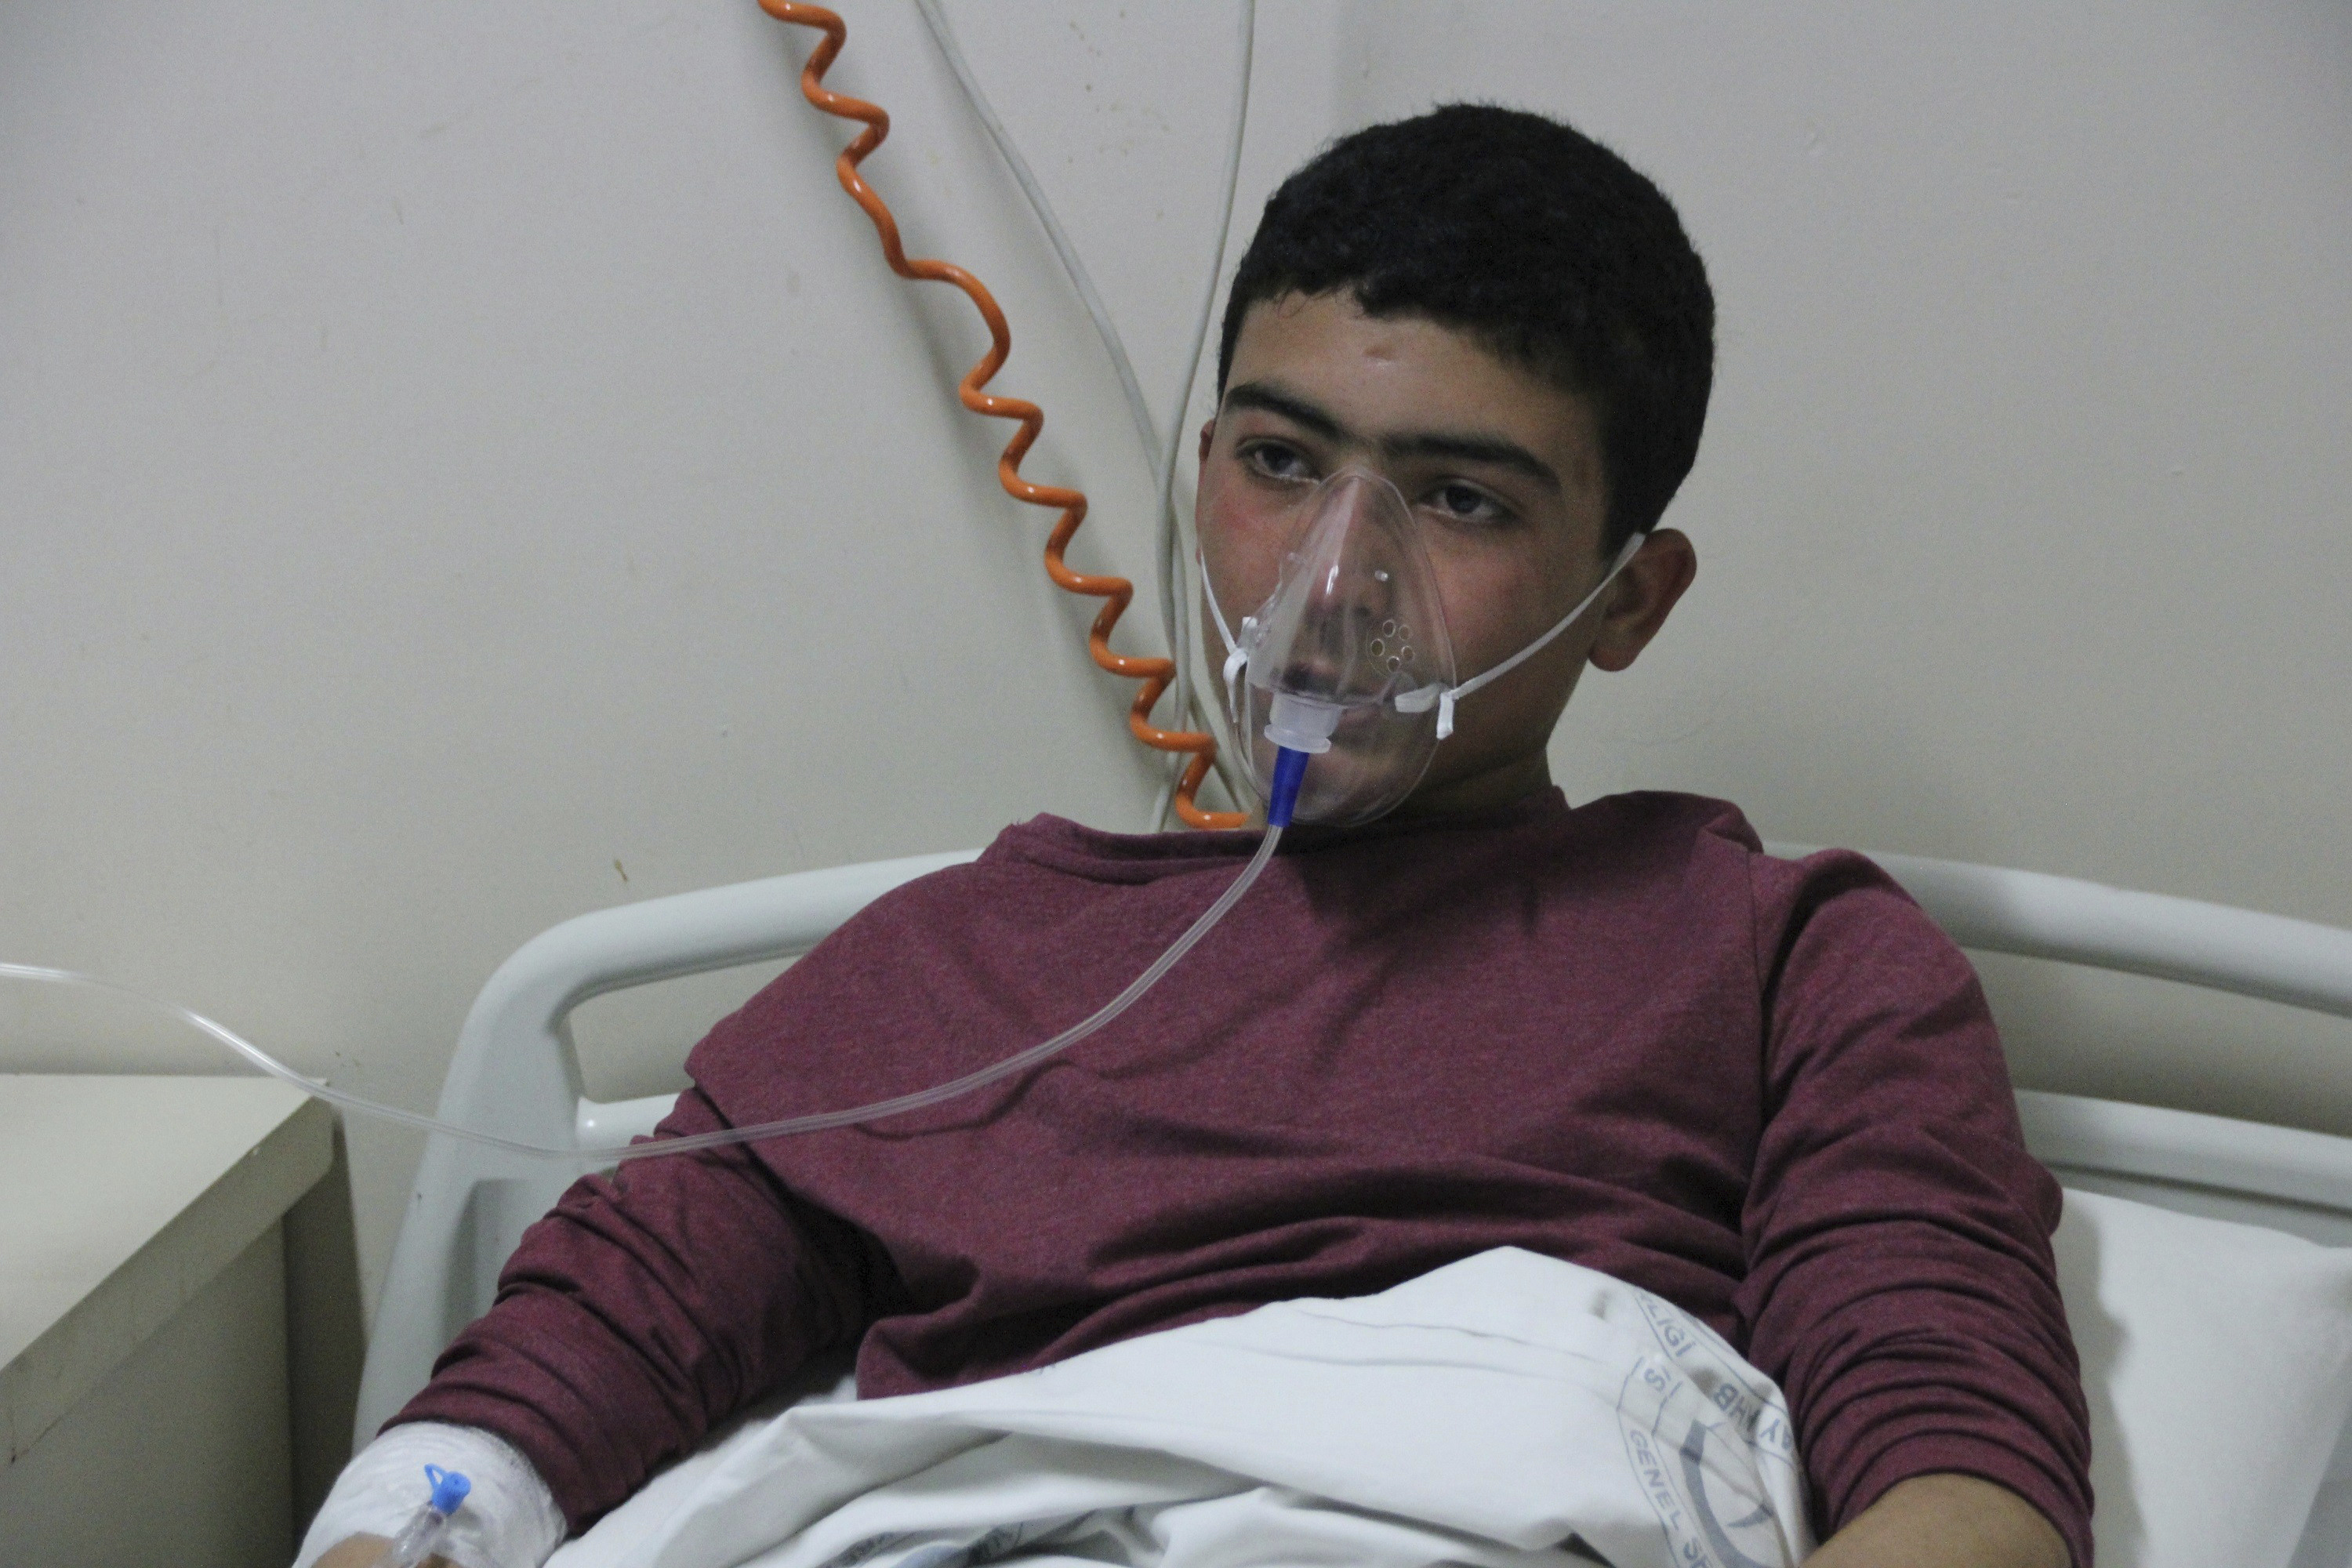  A victim of alleged chemical weapons attacks in Syrian city of Idlib.